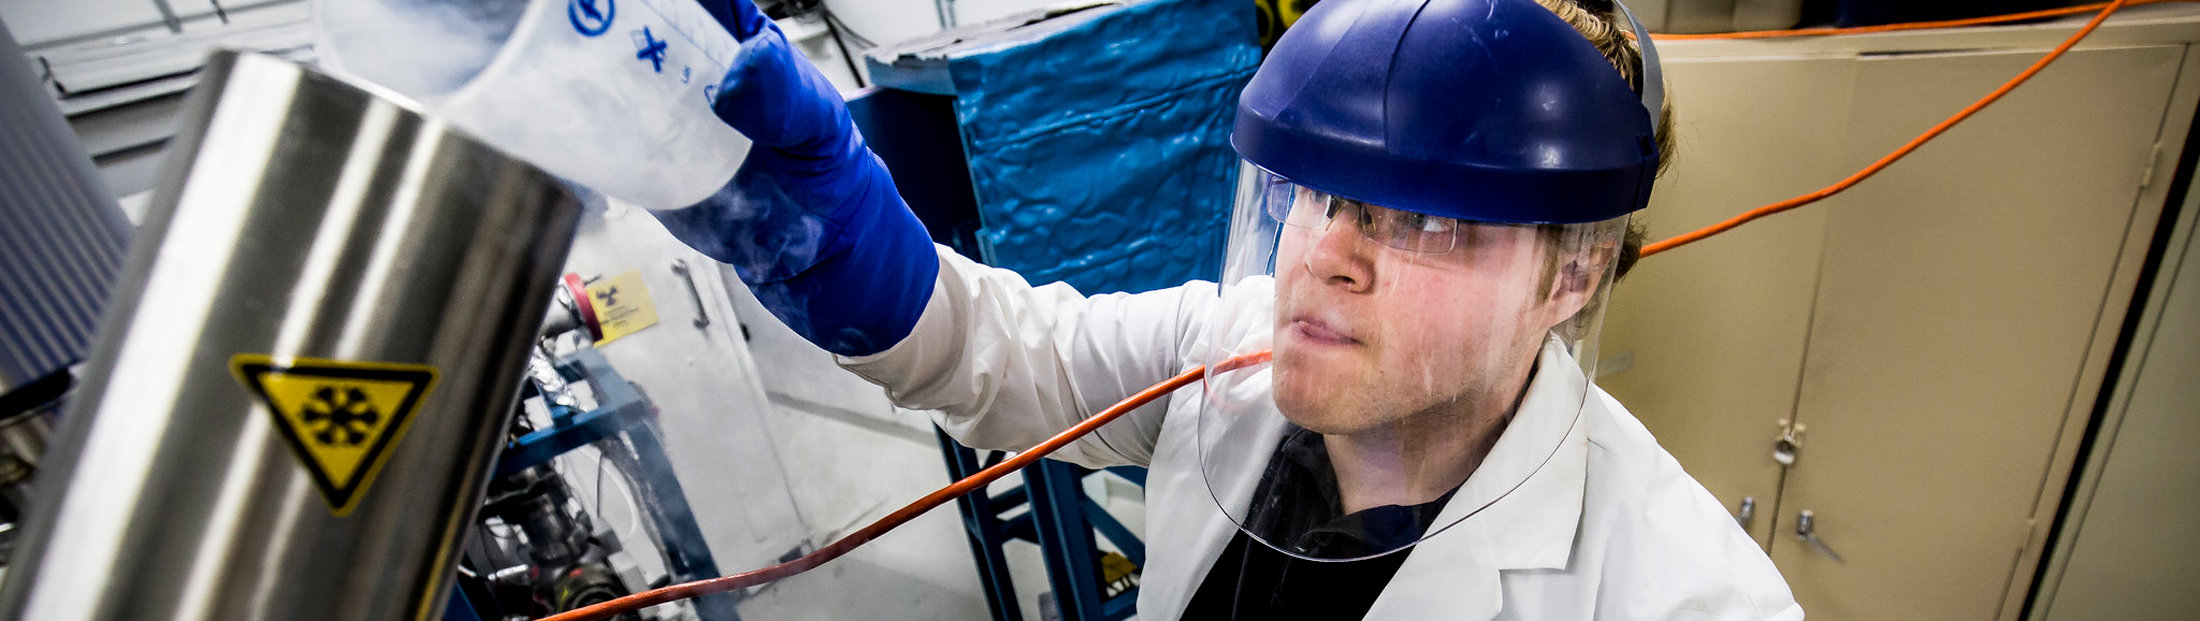 A student wearing safety gear working in a lab pouring liquids